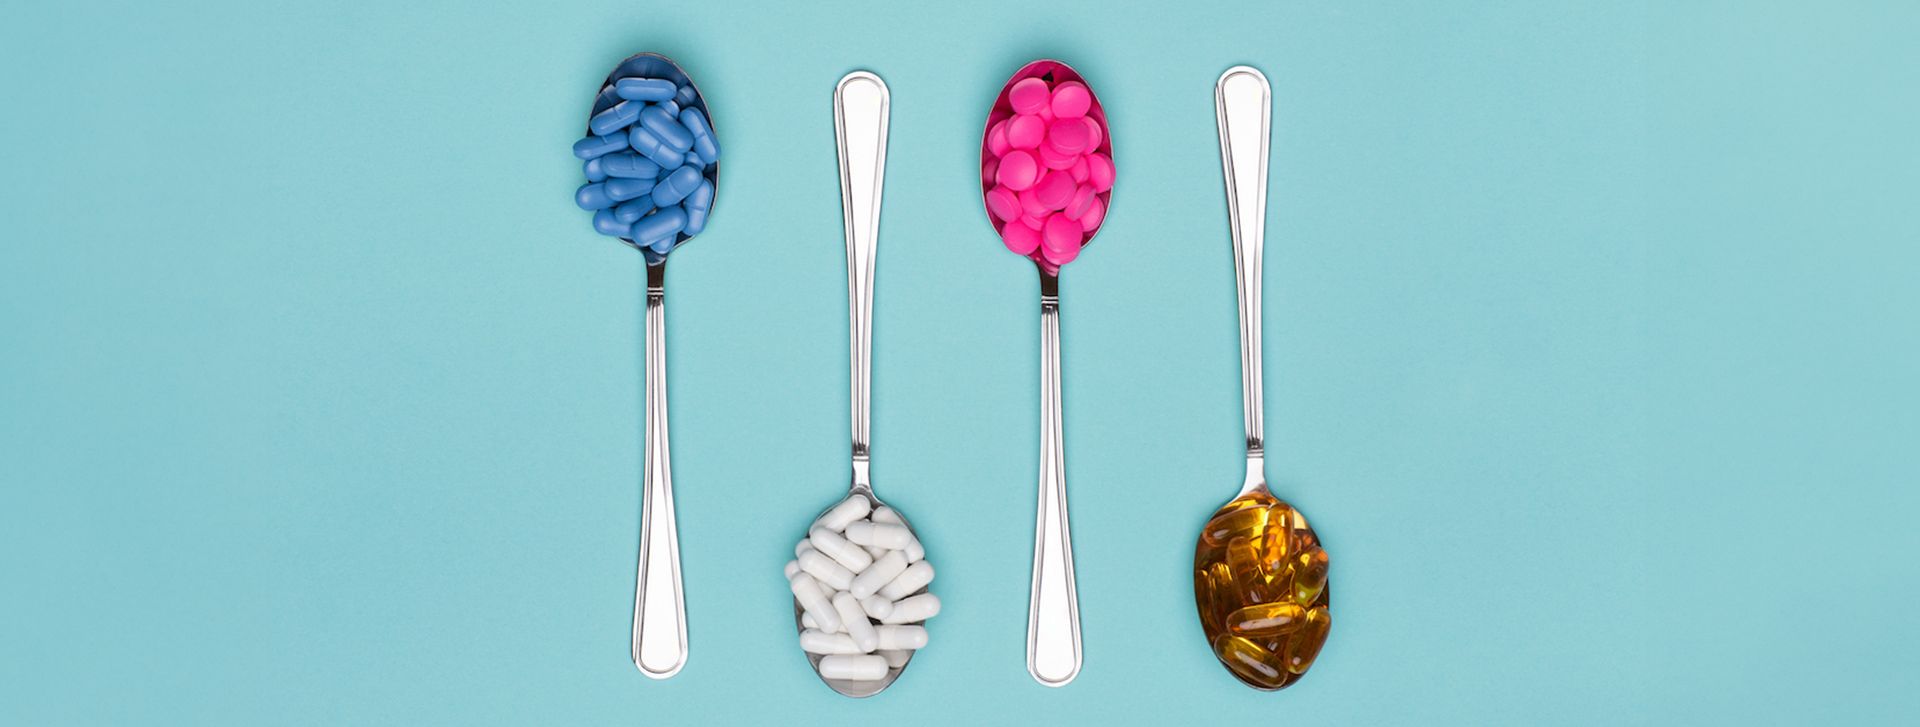 Should You Try Slimming Pills This New Year?
